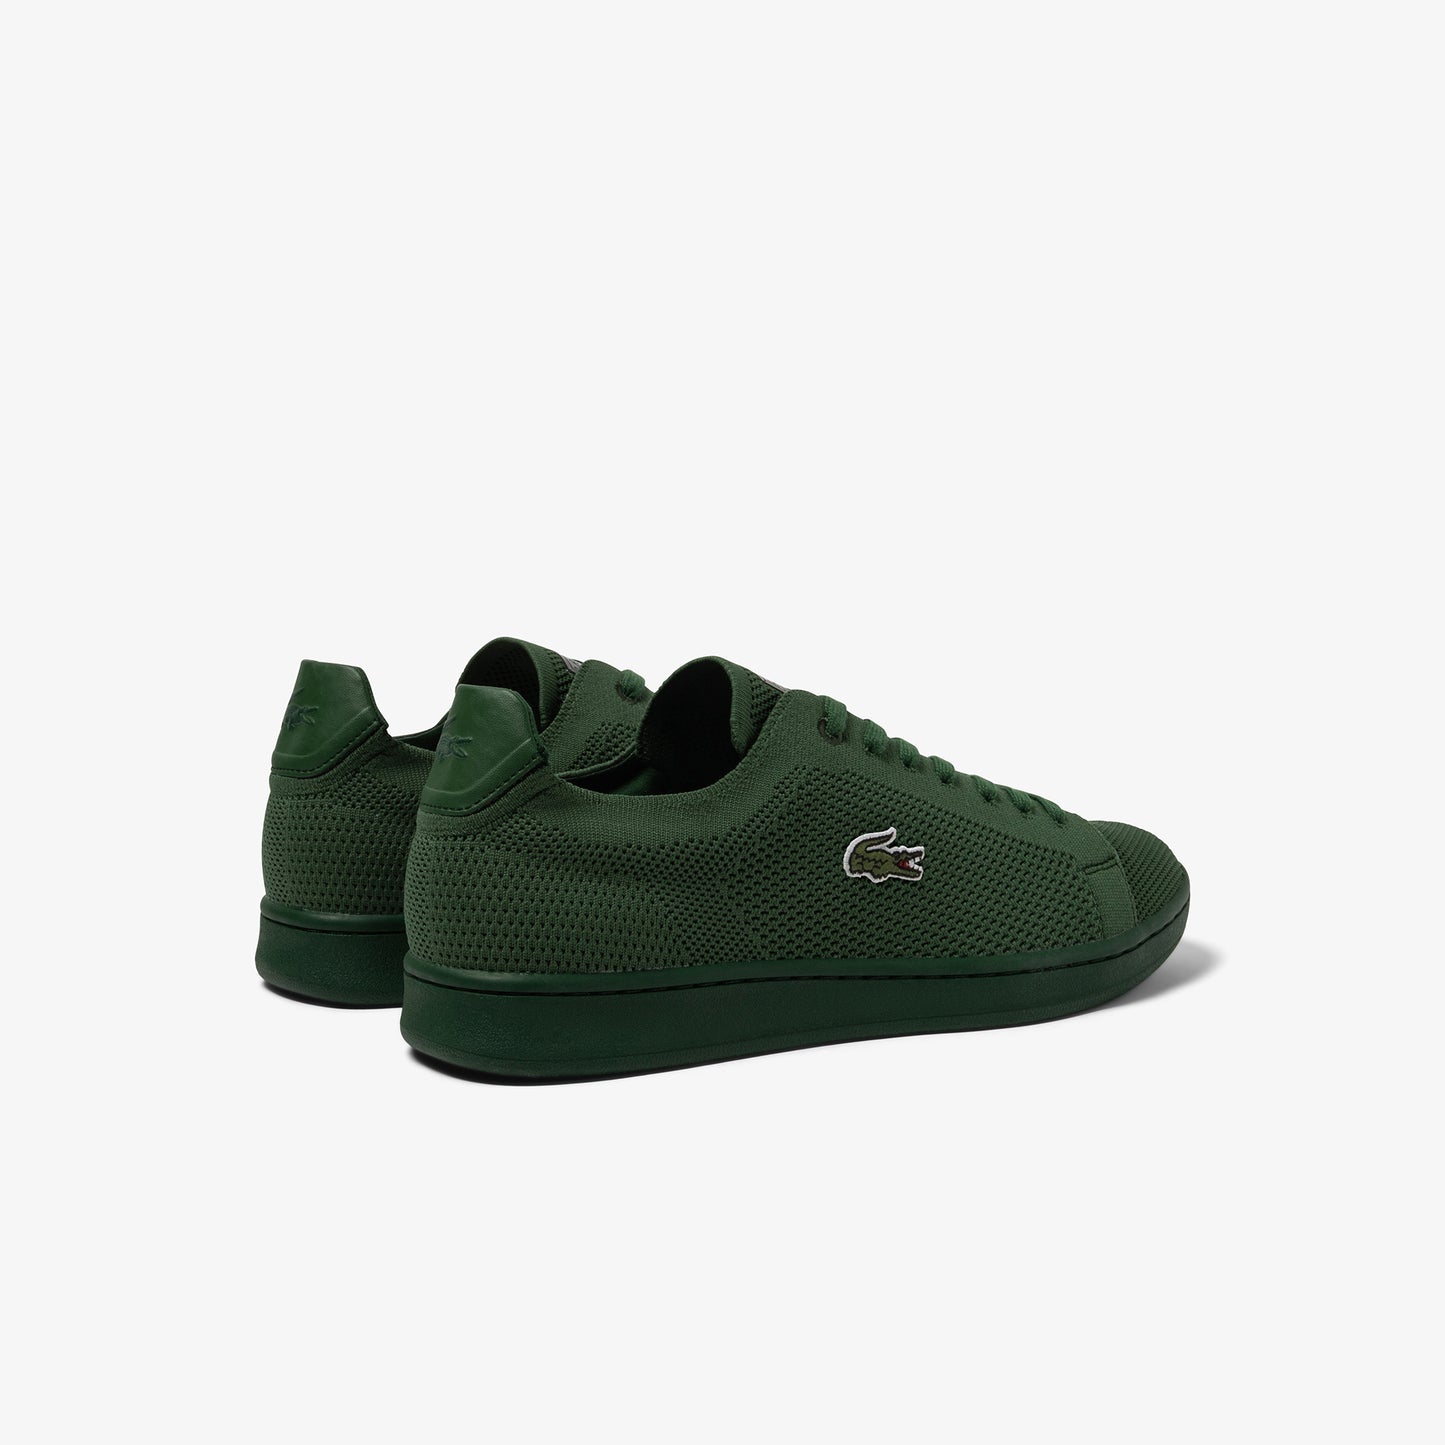 Men's Lacoste Carnaby Piquee Textile Trainers